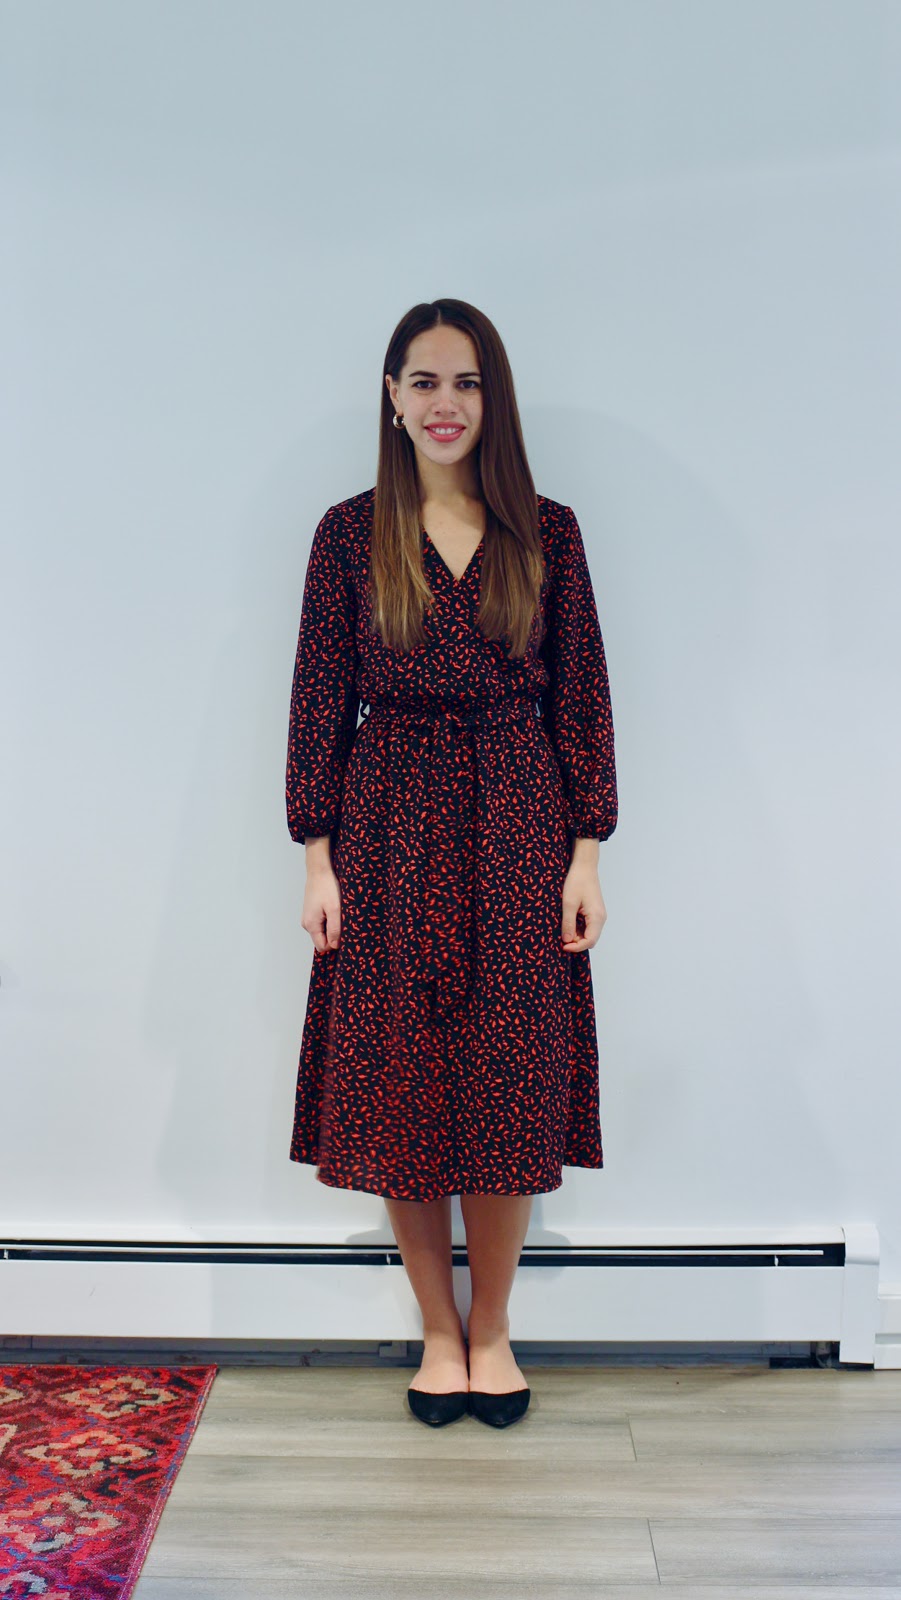 Jules in Flats - Midi Wrap Dress (Business Casual Fall Workwear on a Budget) 